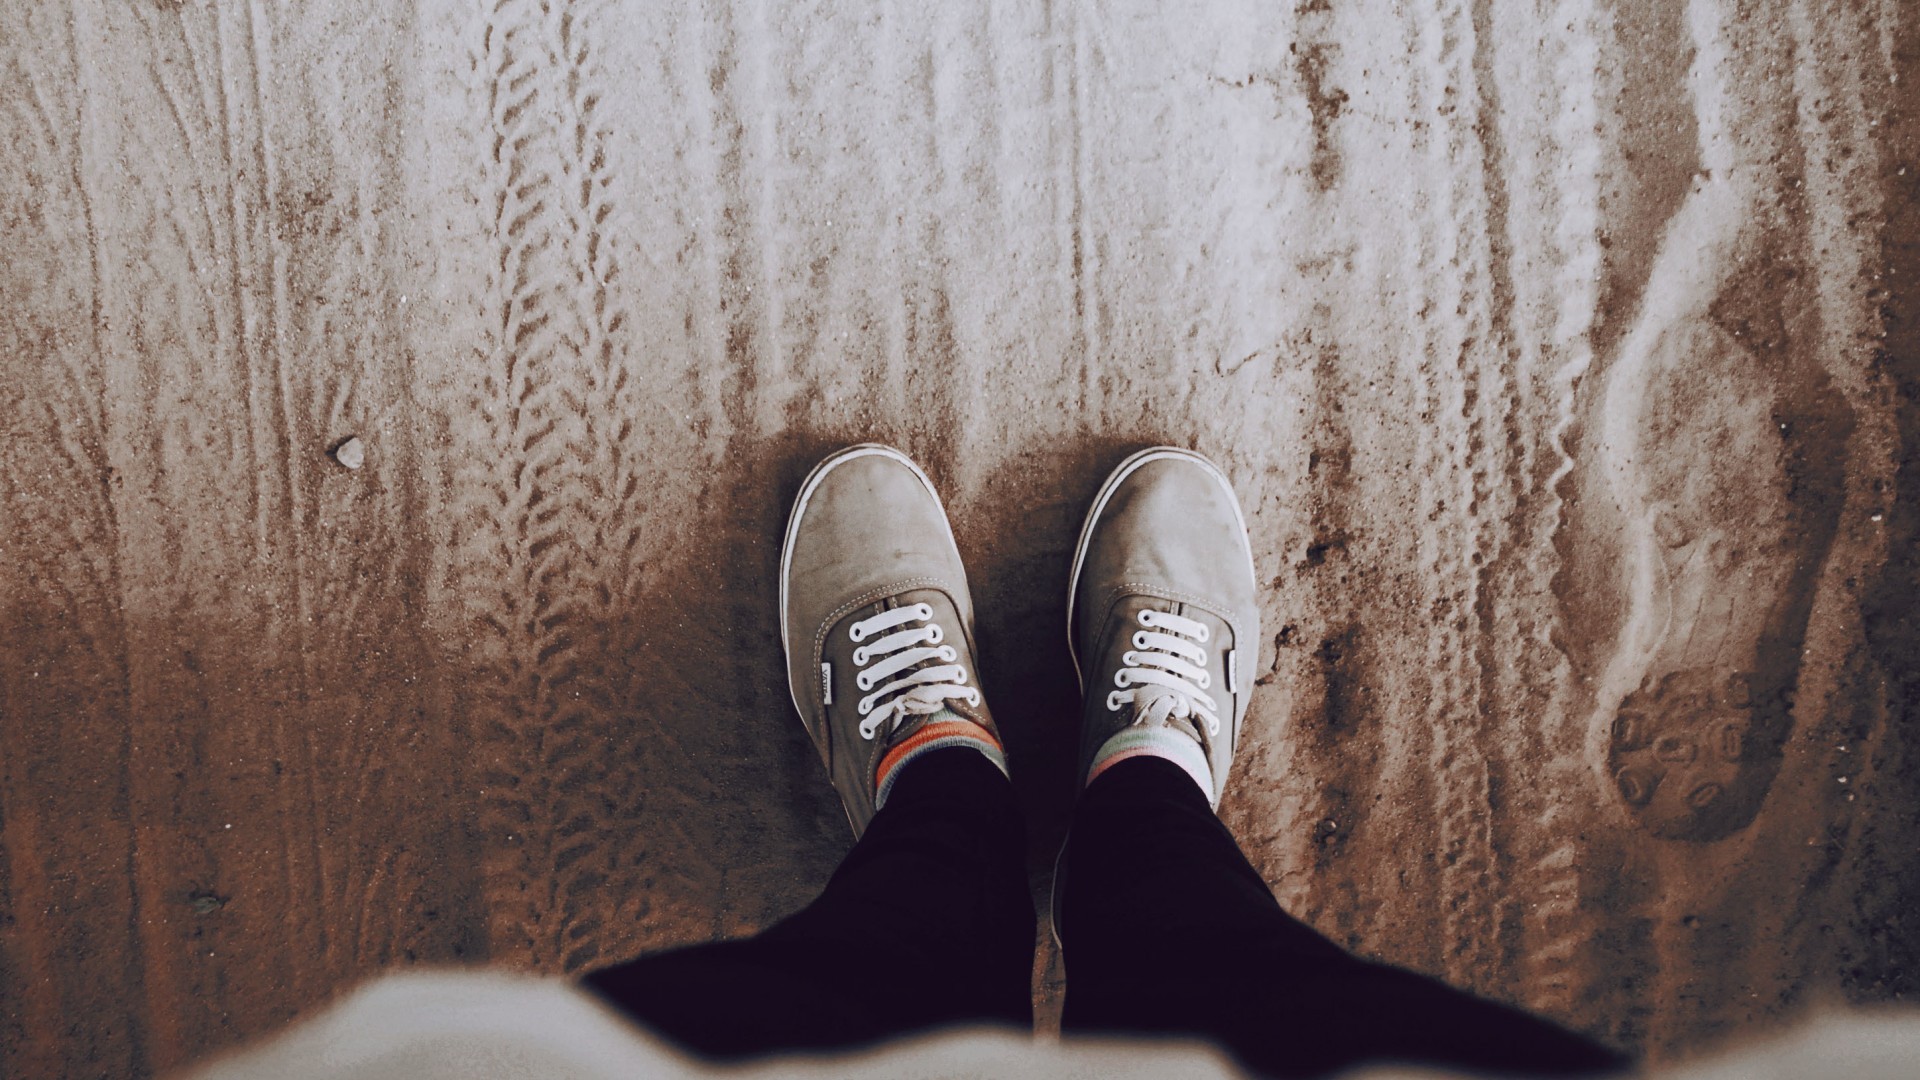 Wallpaper, white, black, sand, red, wood, shoes, tights, spring, color, hand, leg, photograph, shoe, footwear, 1920x1080 px, human body, close up, Looking Down 1920x1080